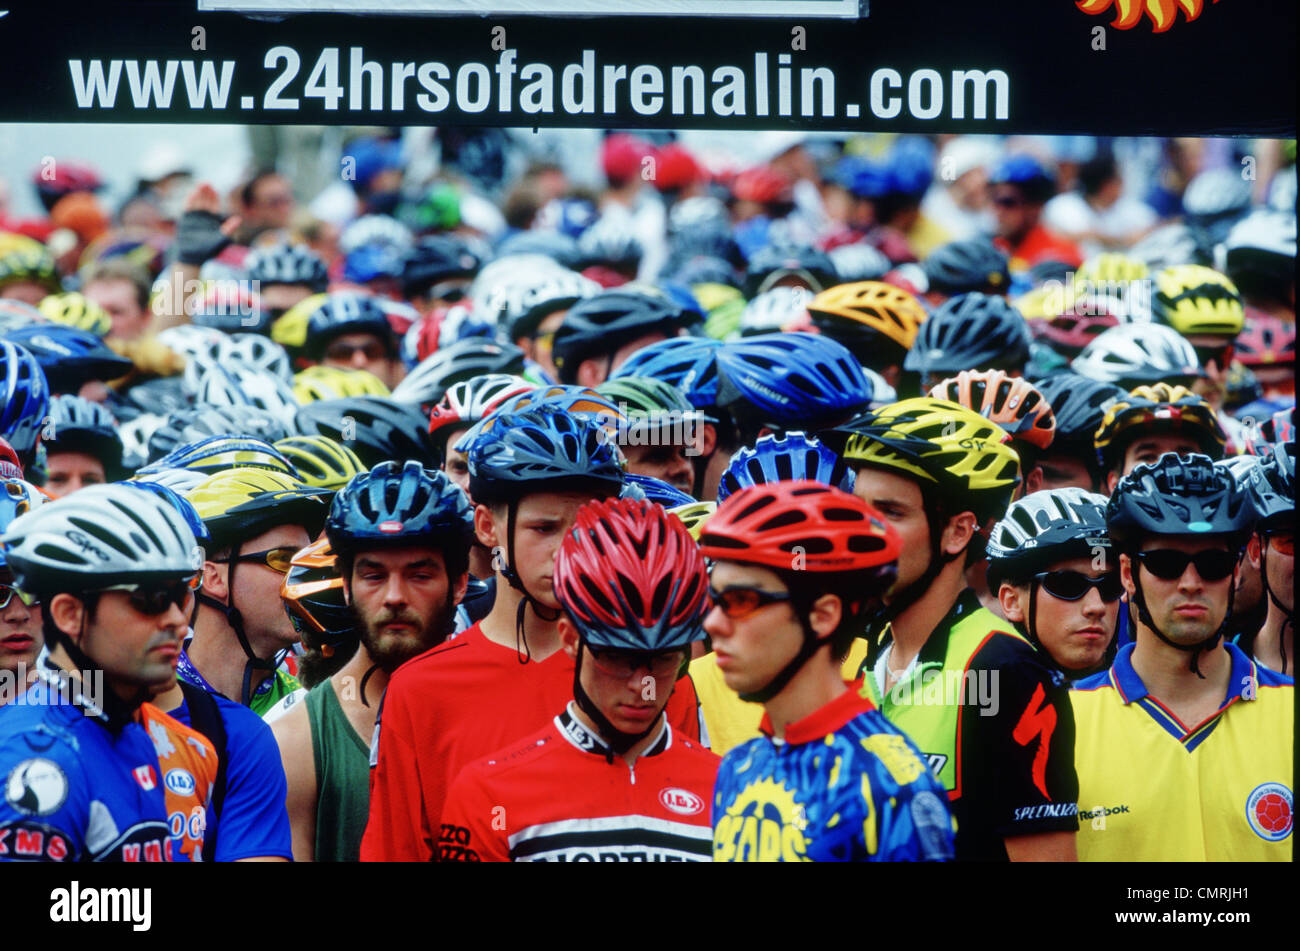 Participants gather for the annual 24 Hours of Adrenalin mountain Bike event, Toronto, Ontario. Stock Photo